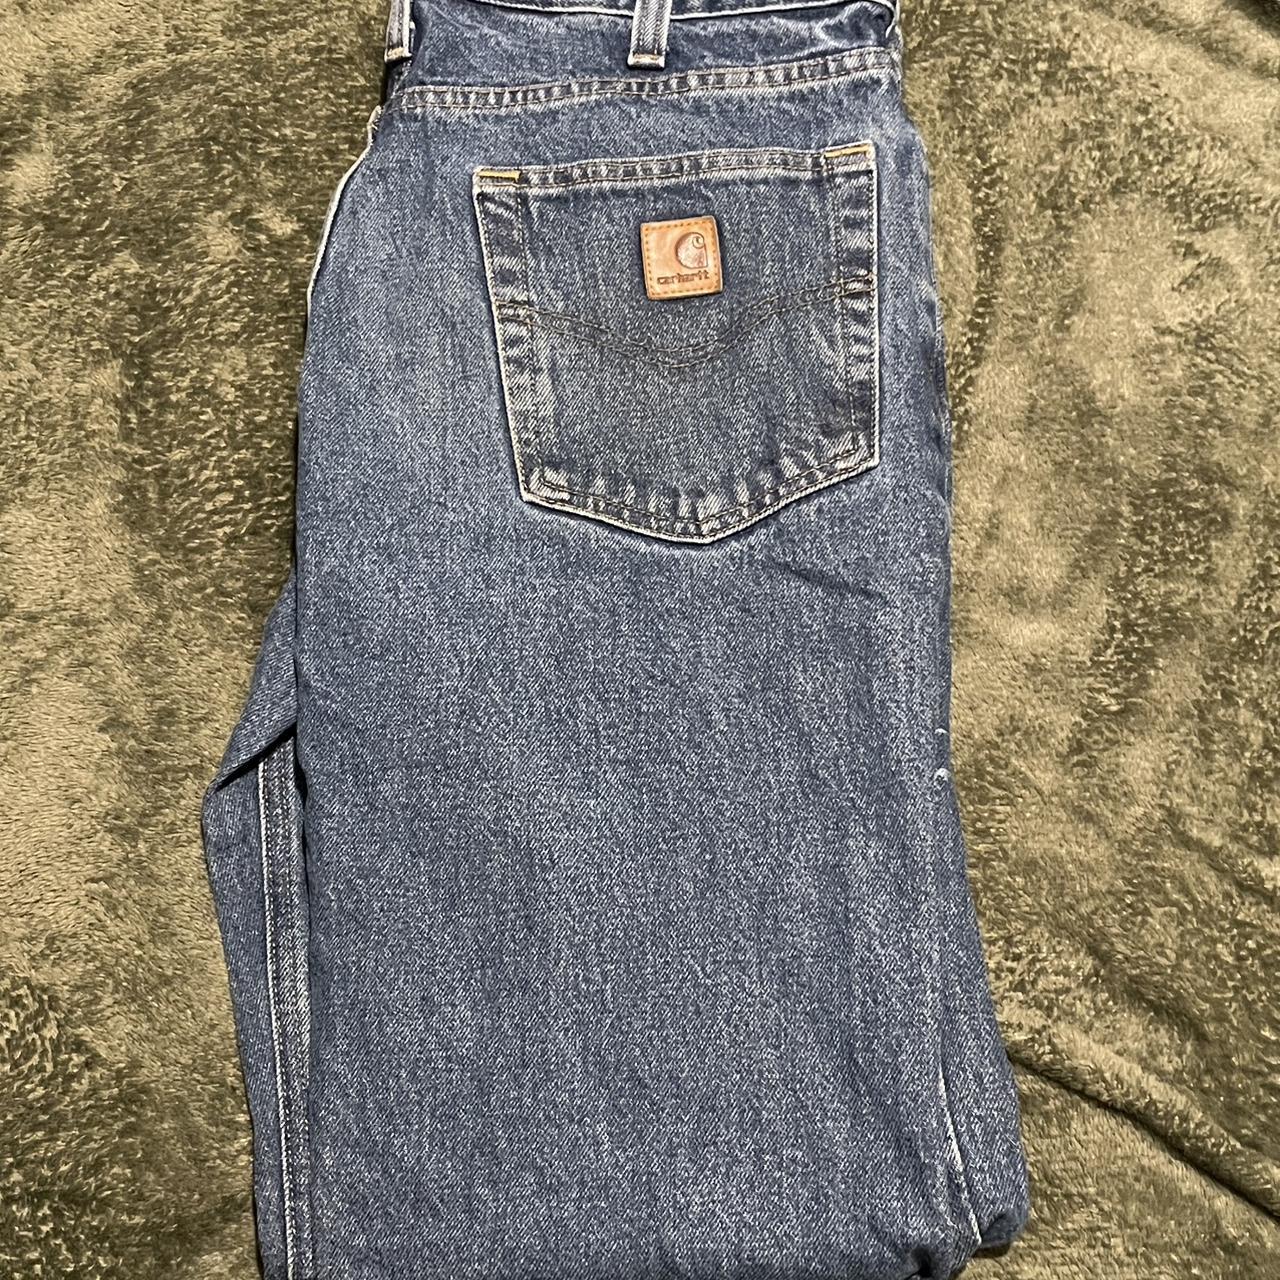 Cathcart jeans Relaxed fit W33 L34 #Carhartt... - Depop